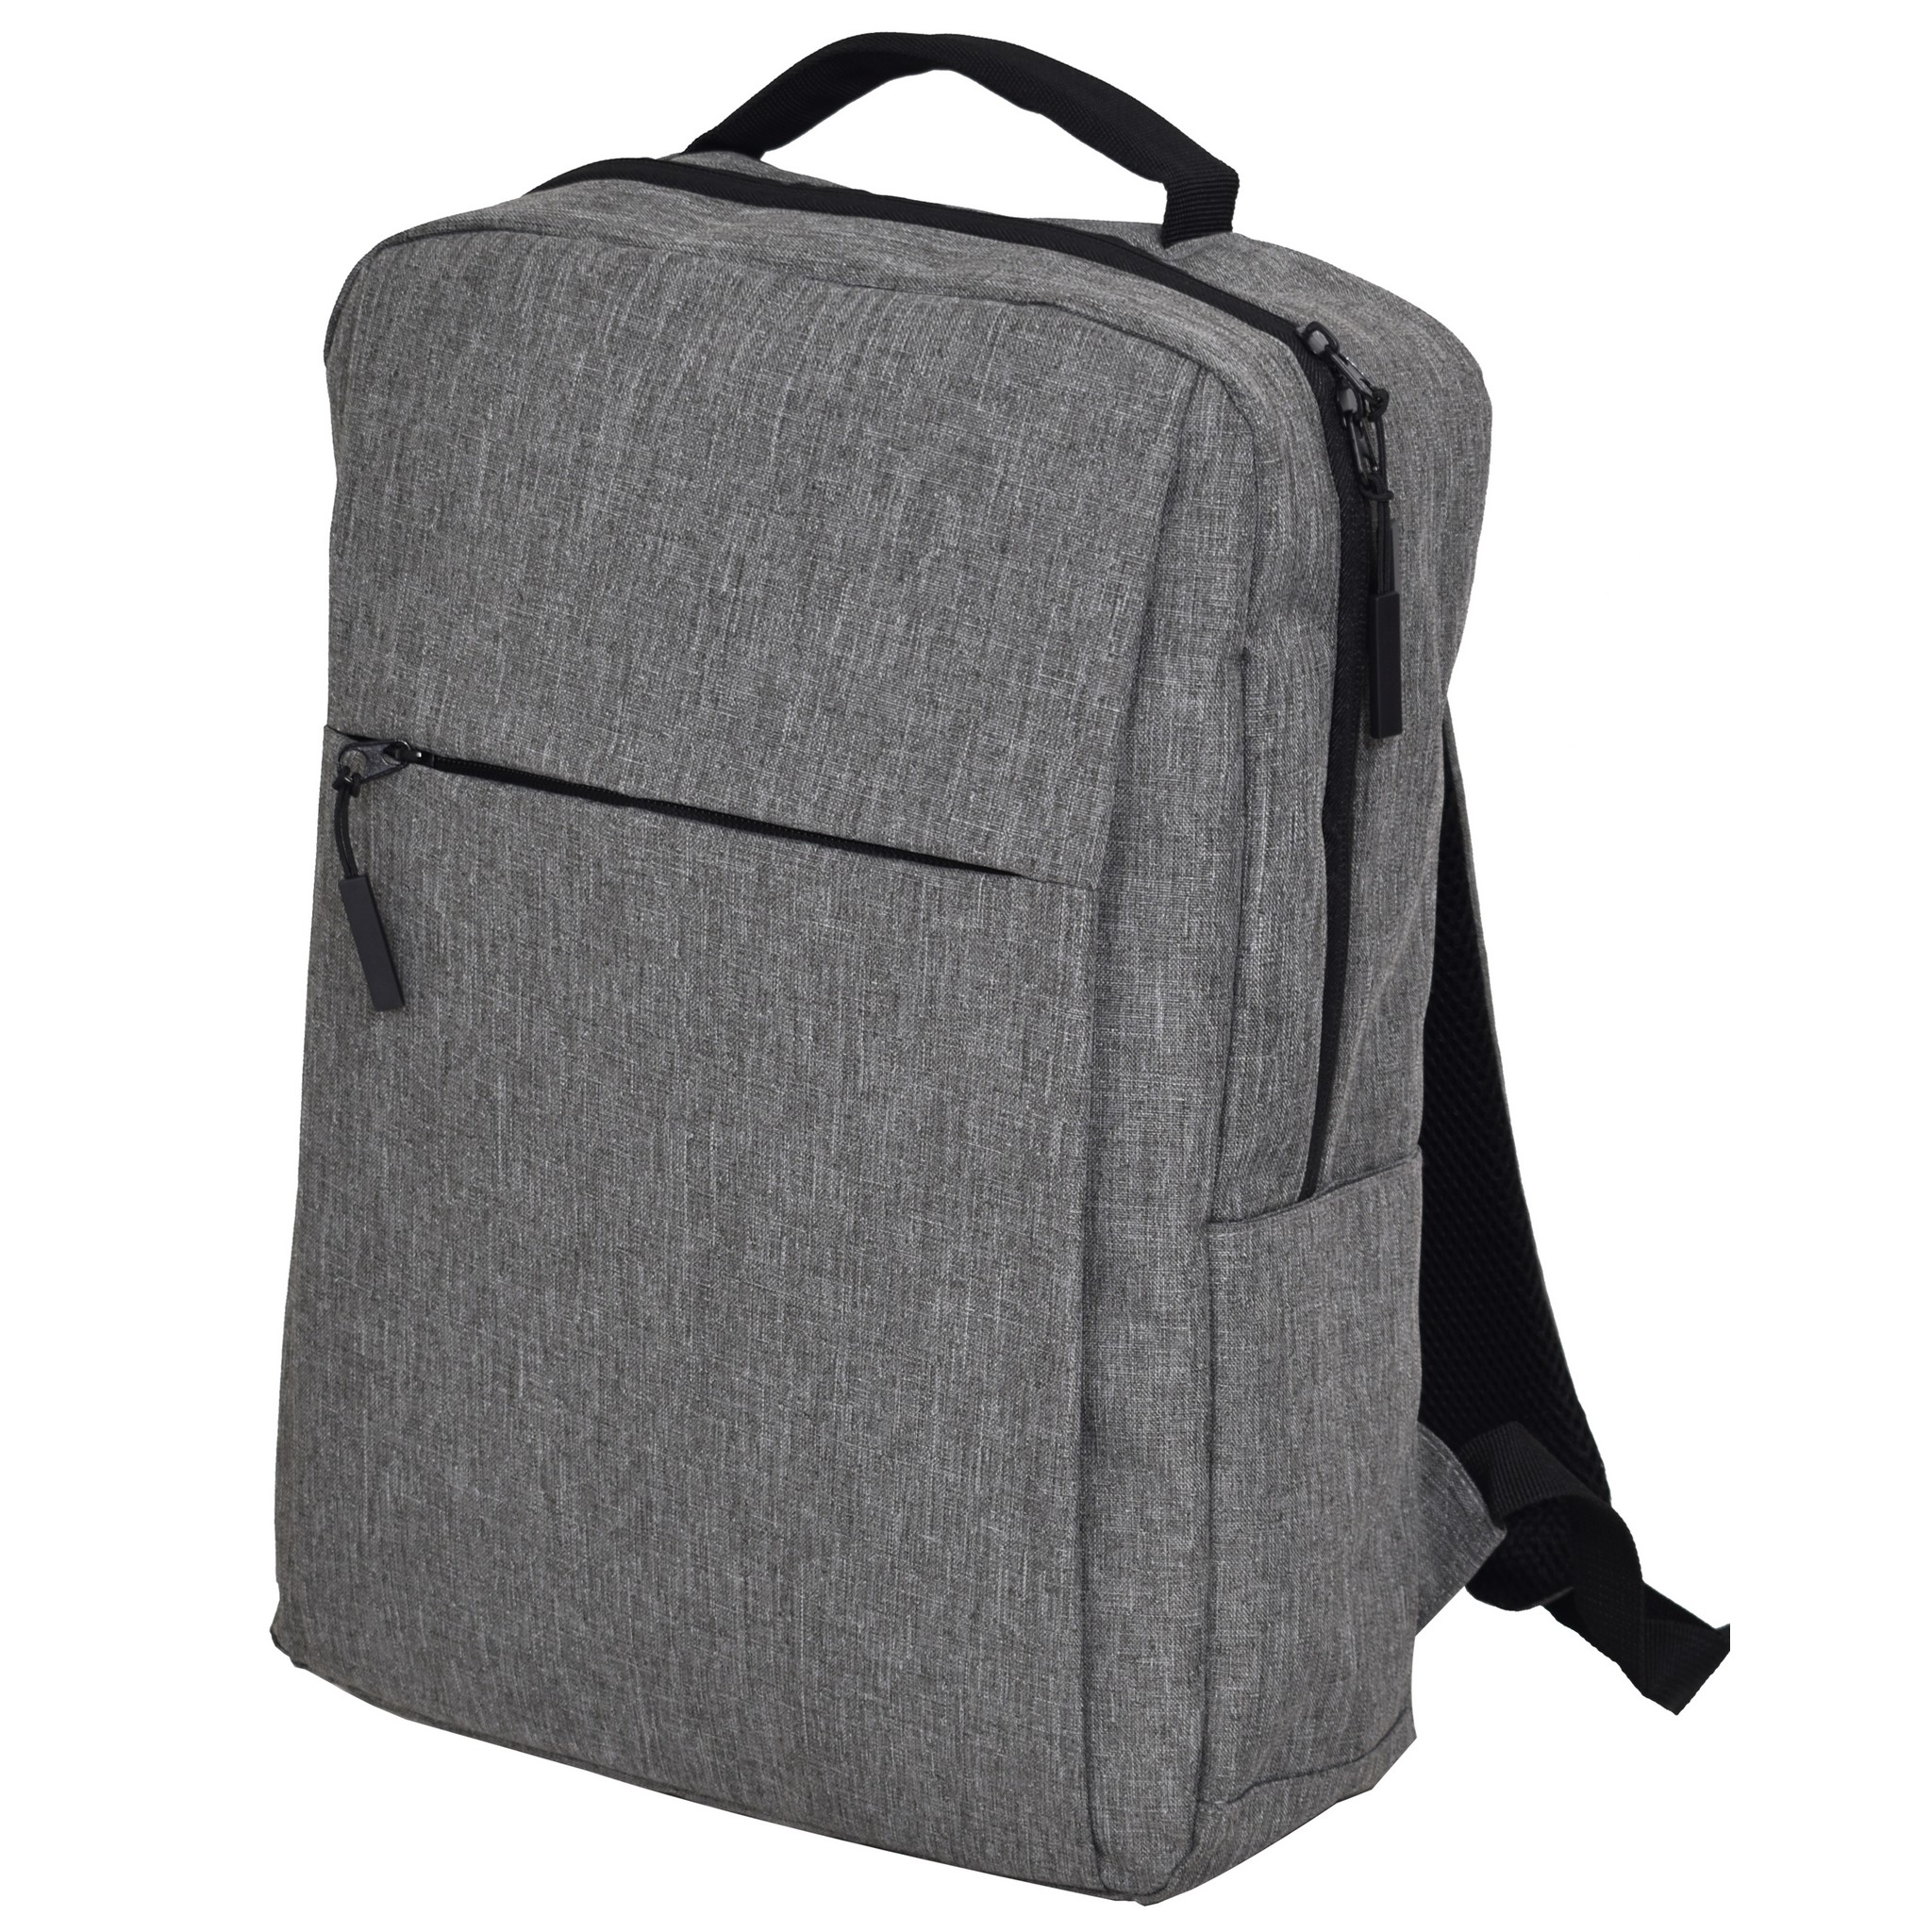 Sturdy Laptop Backpack - Available in Black or Grey